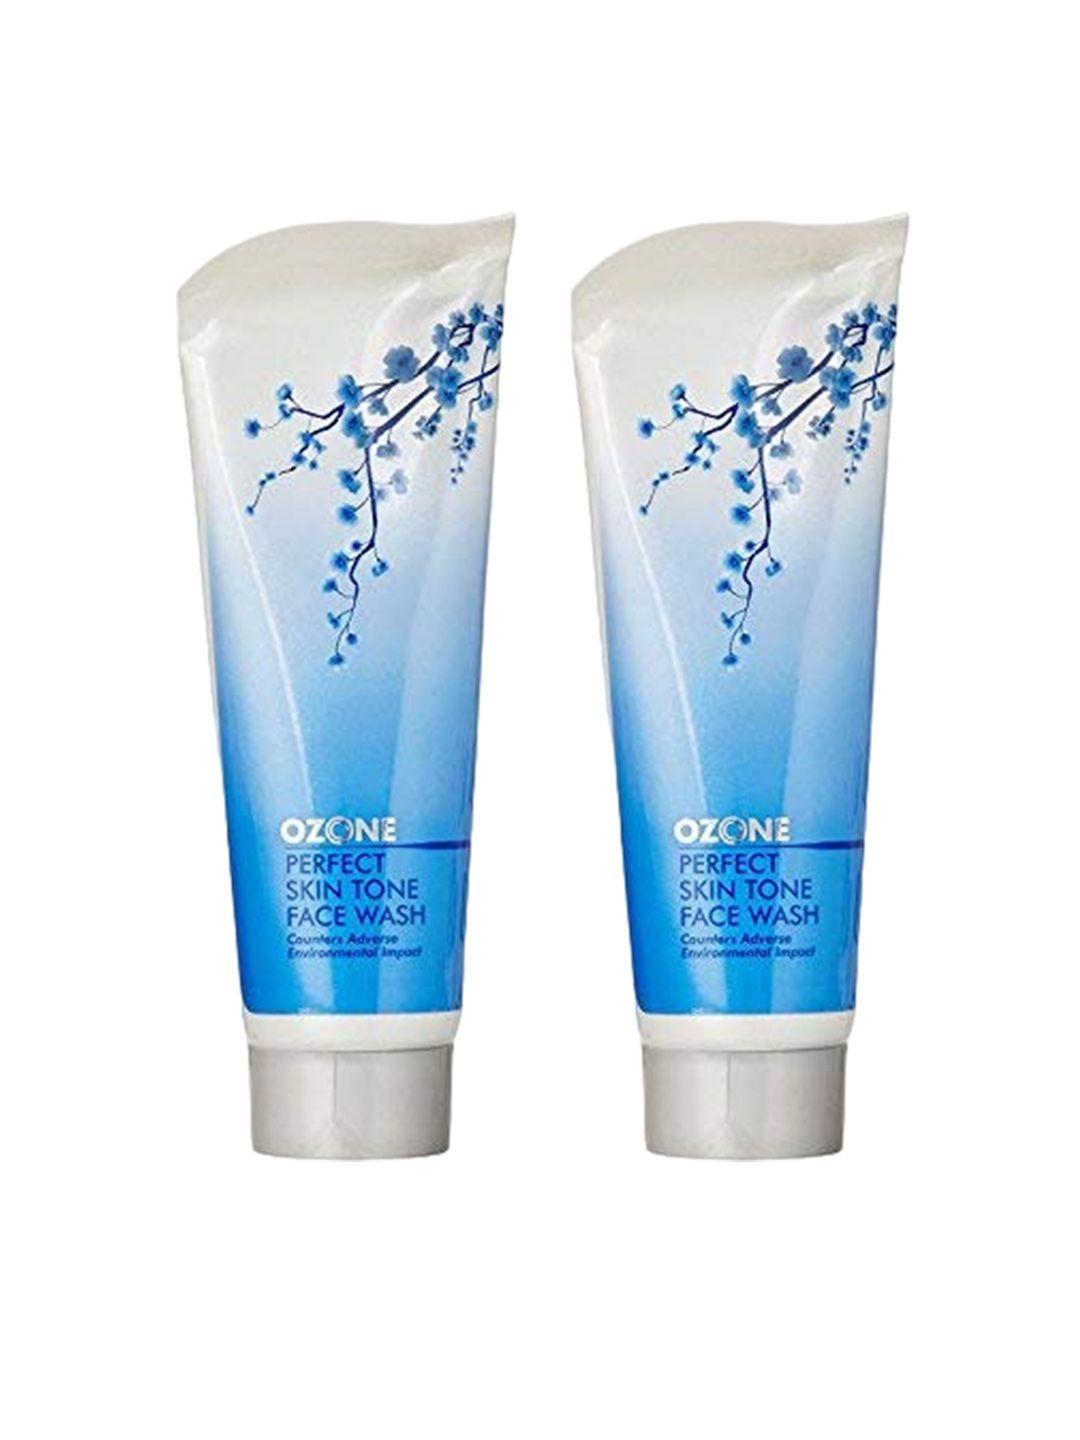 ozone set of 2 perfect skin tone face wash with cucumber & lemon for dark spots-100ml each